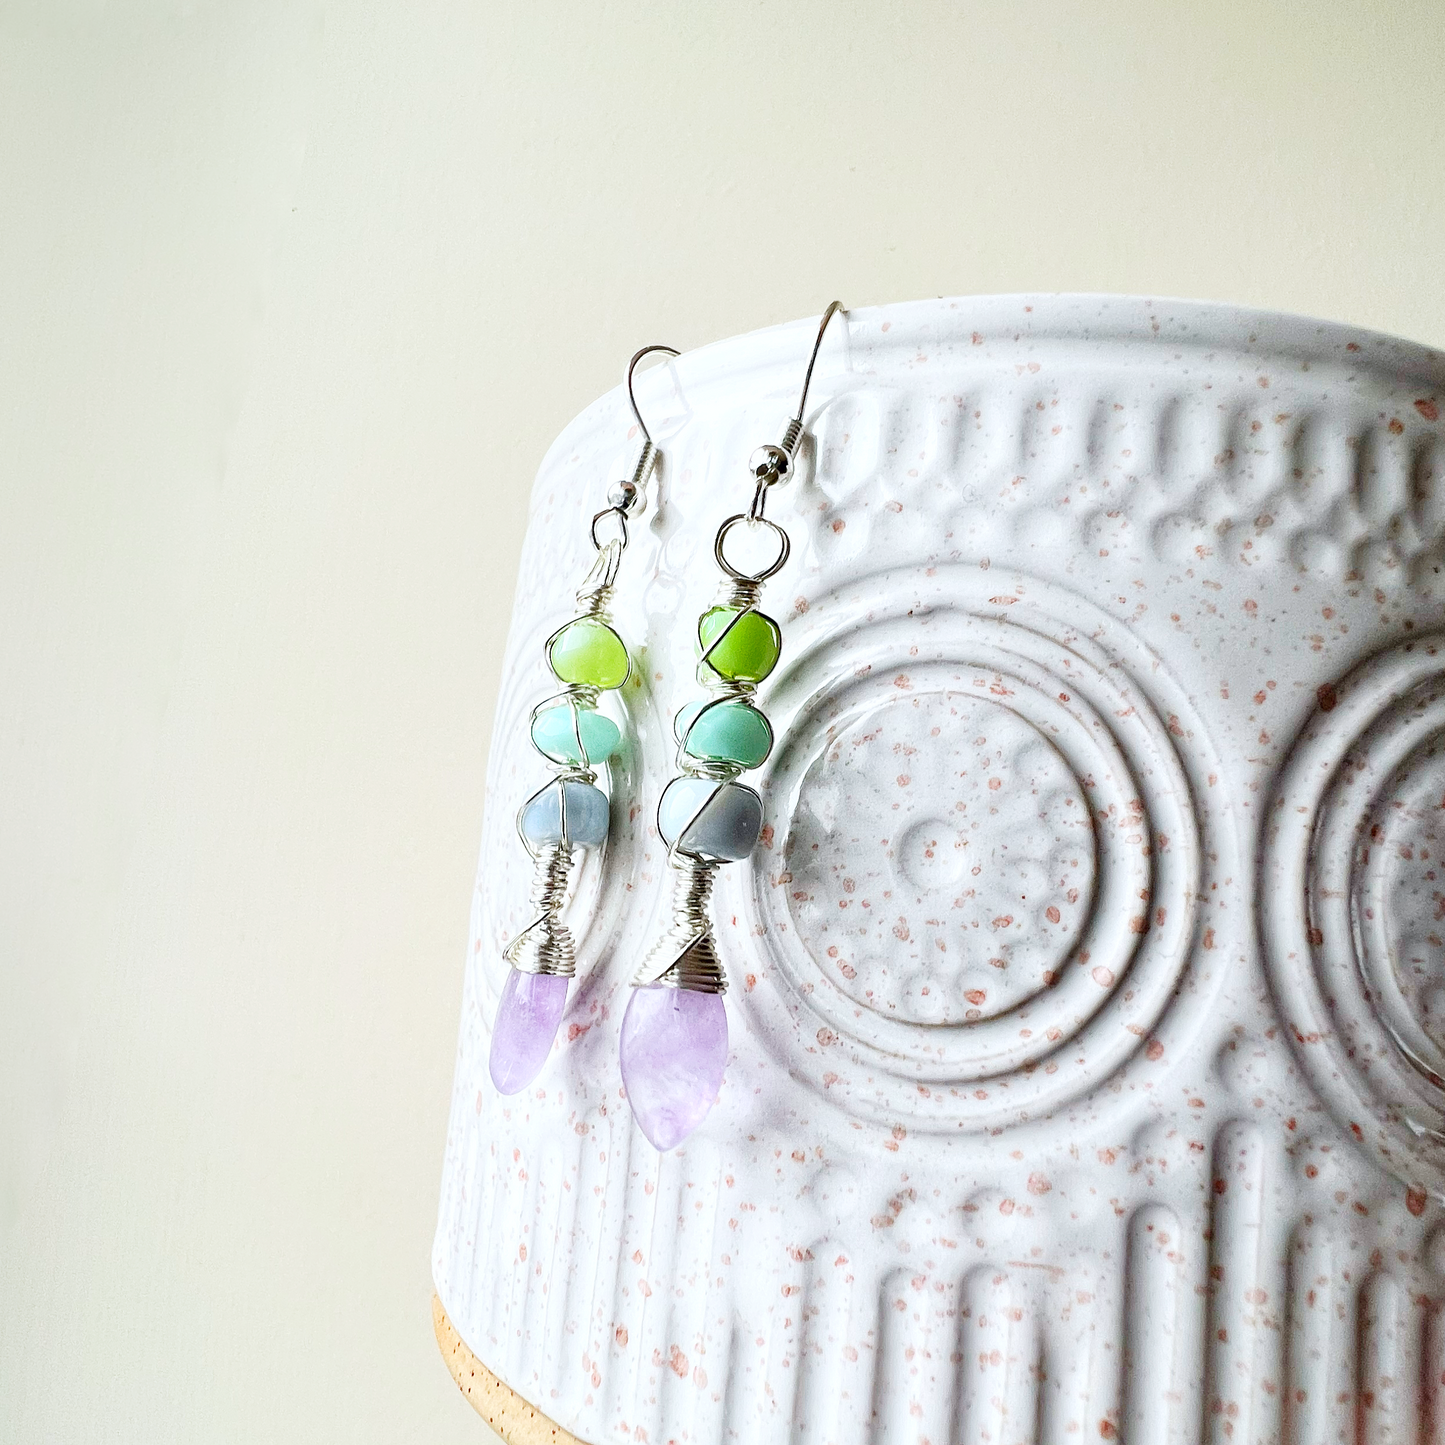 Twisted kisses earrings - Lavender amethyst and mixed opals